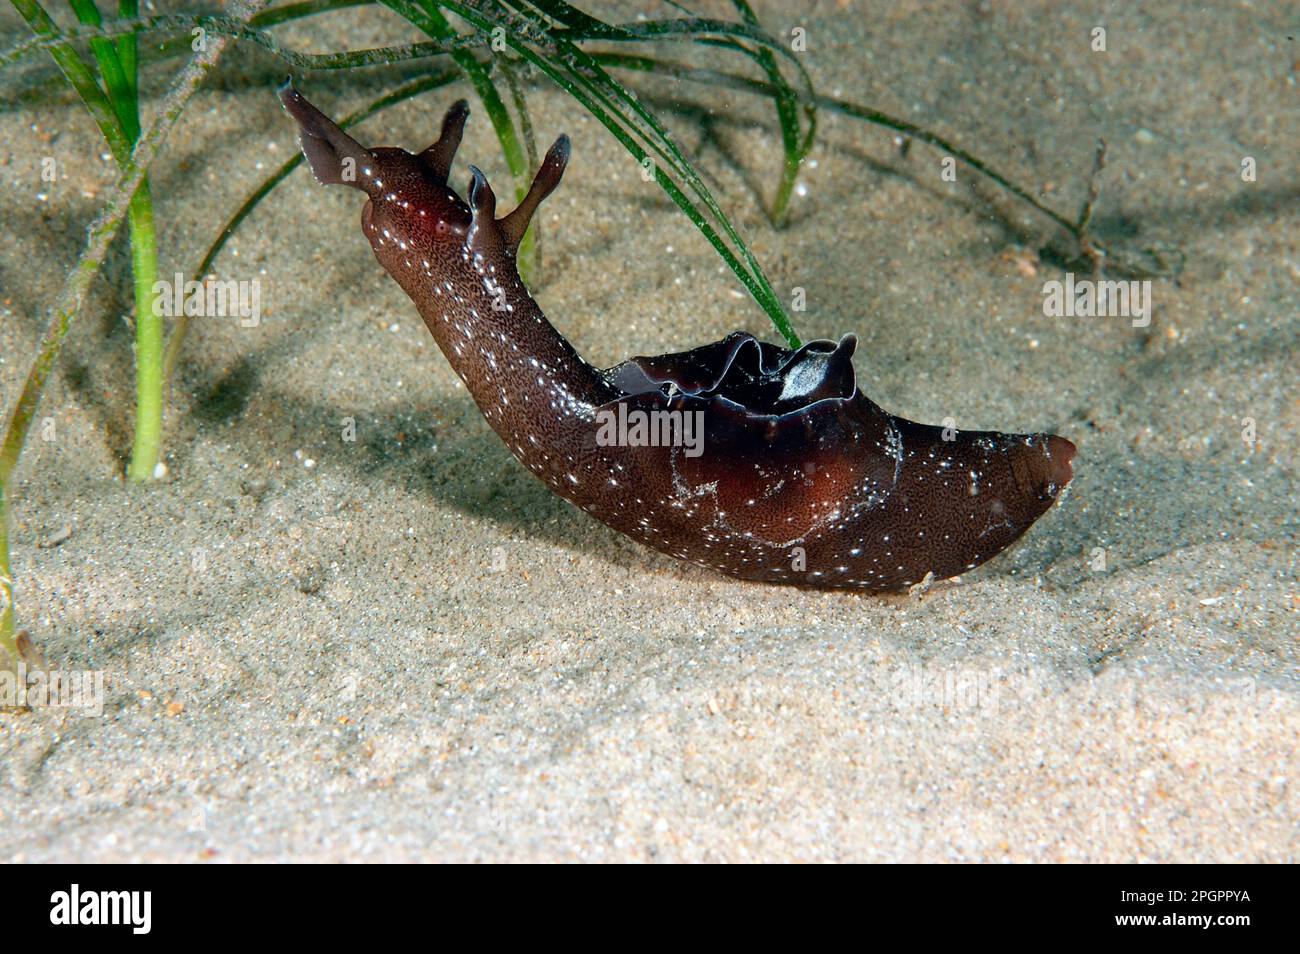 Spotted sea-hare, Spotted sea-hares, Other animals, Sea snails, Snails, Animals, Molluscs, Sea-hare (Aplysia punctata) adult, amongst eelgrass on Stock Photo